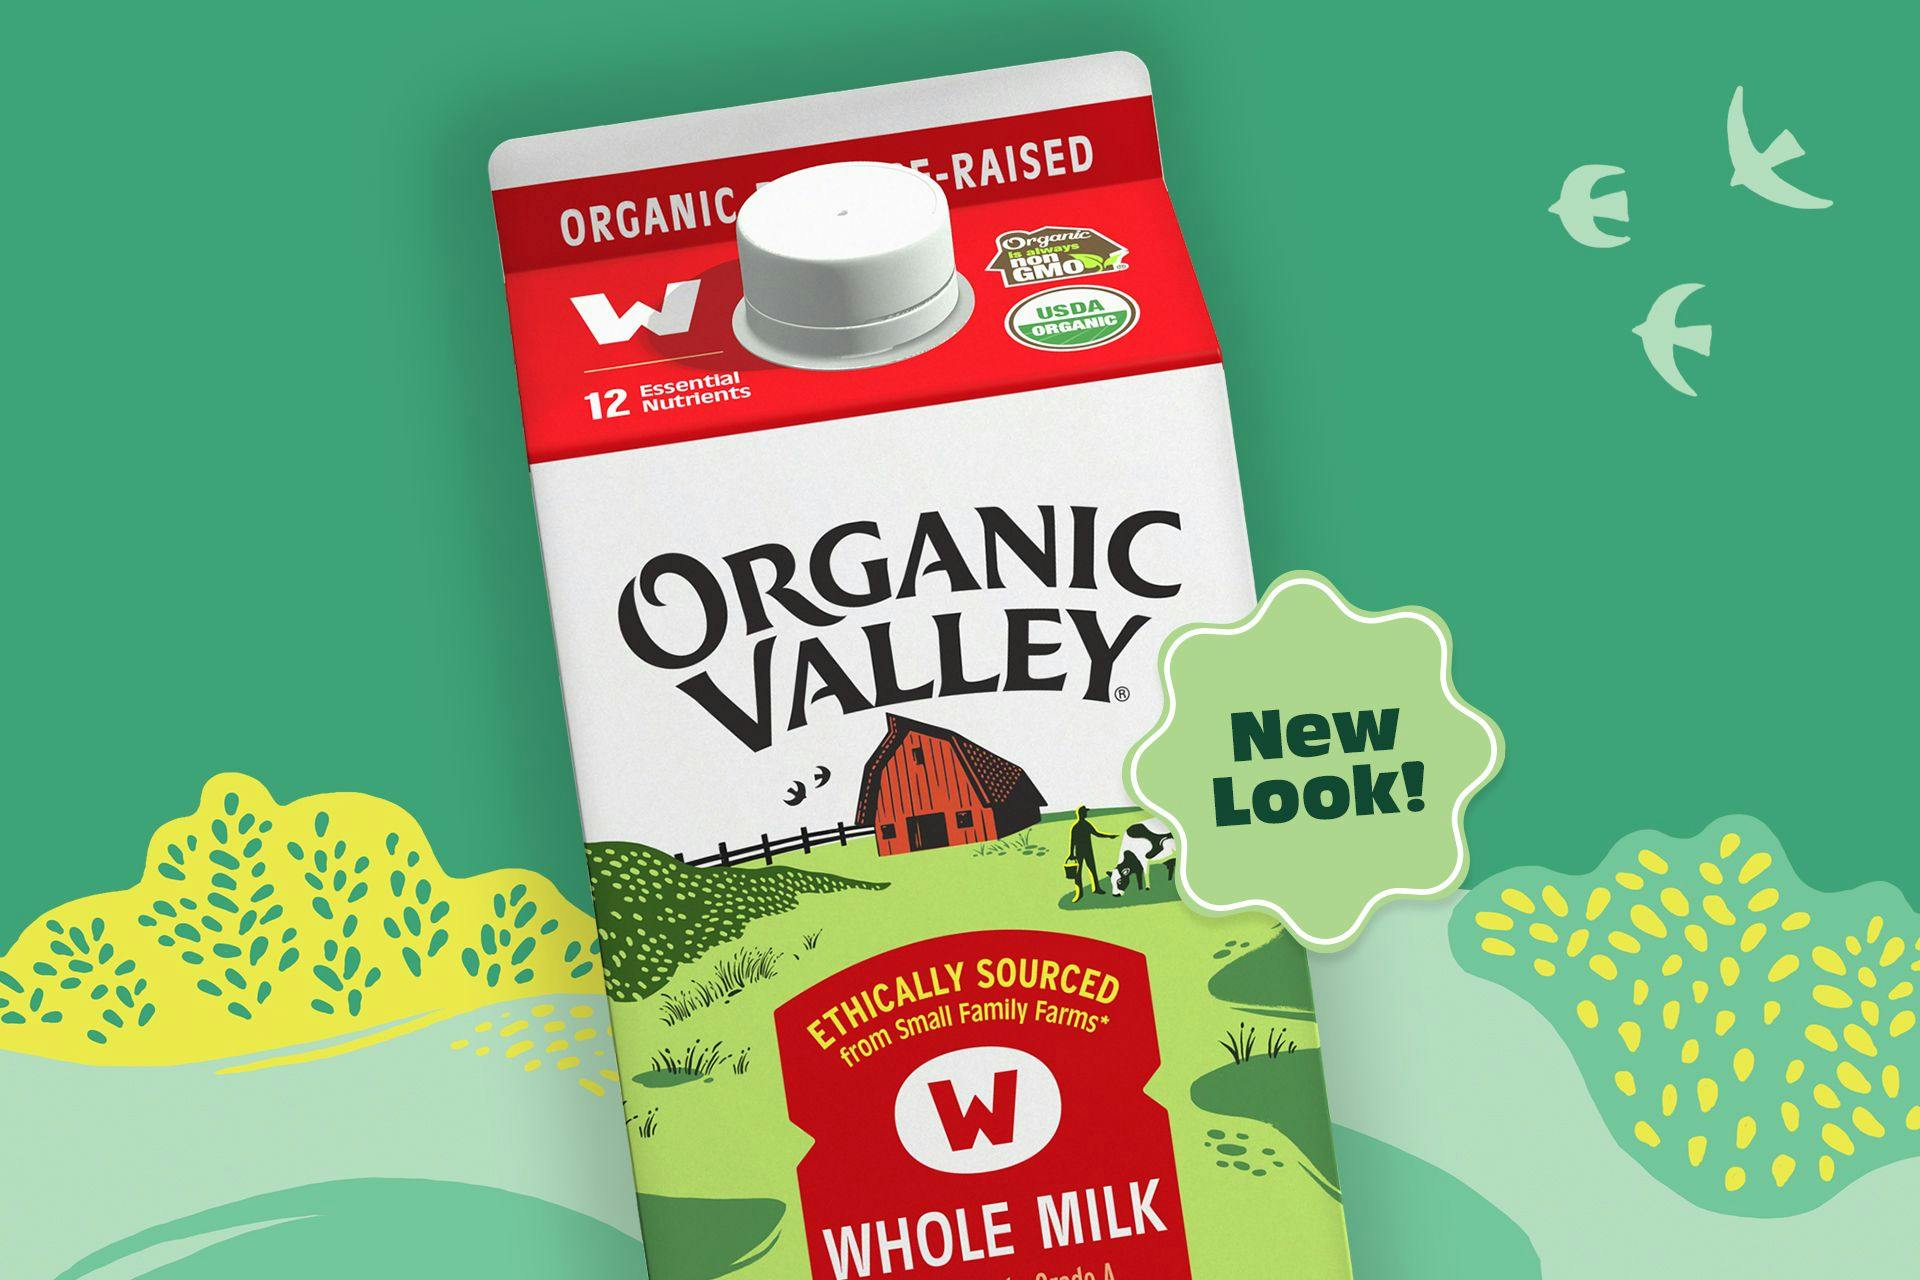 New Organic Valley Whole Milk packaging on a green illustrated background.